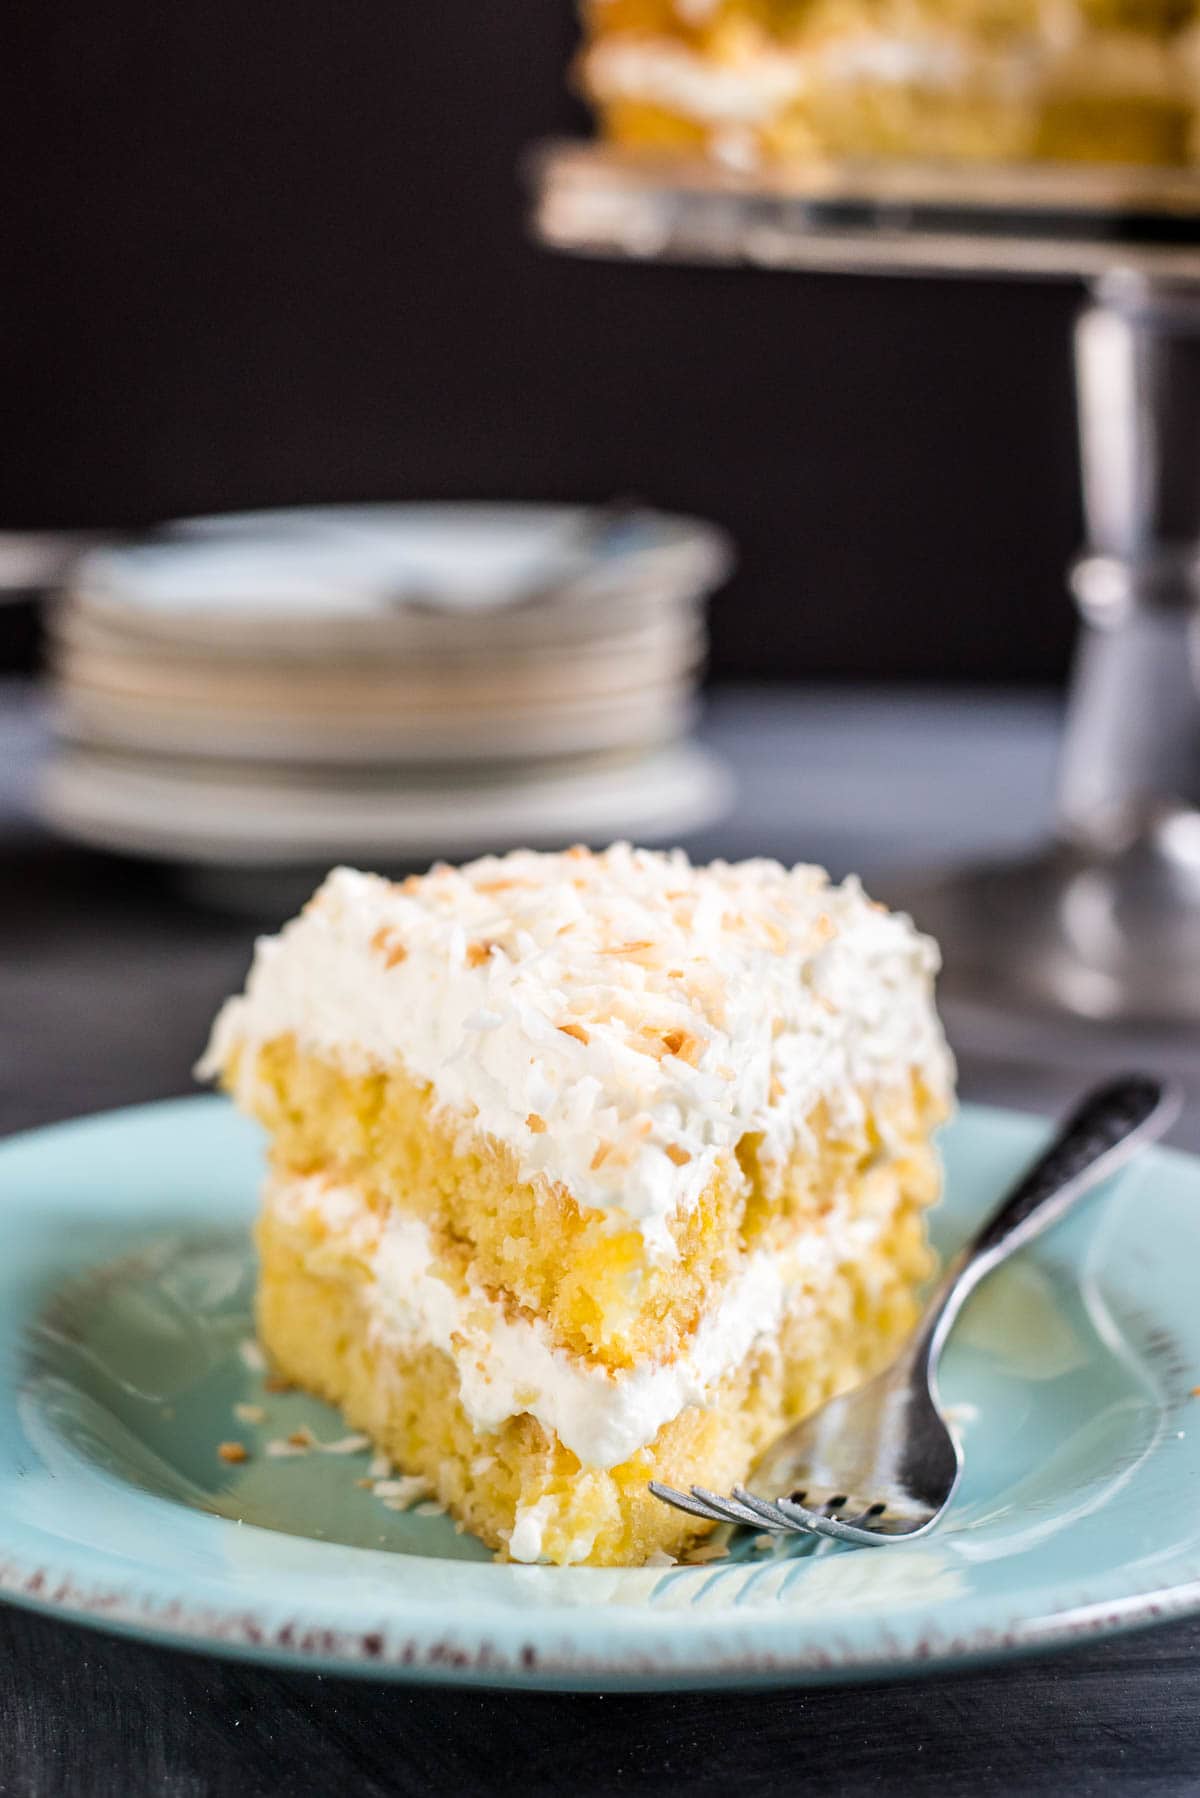 This Pineapple Coconut Cake is packed with fresh pineapple and piled high with a dreamy, fluffy whipped coconut frosting.